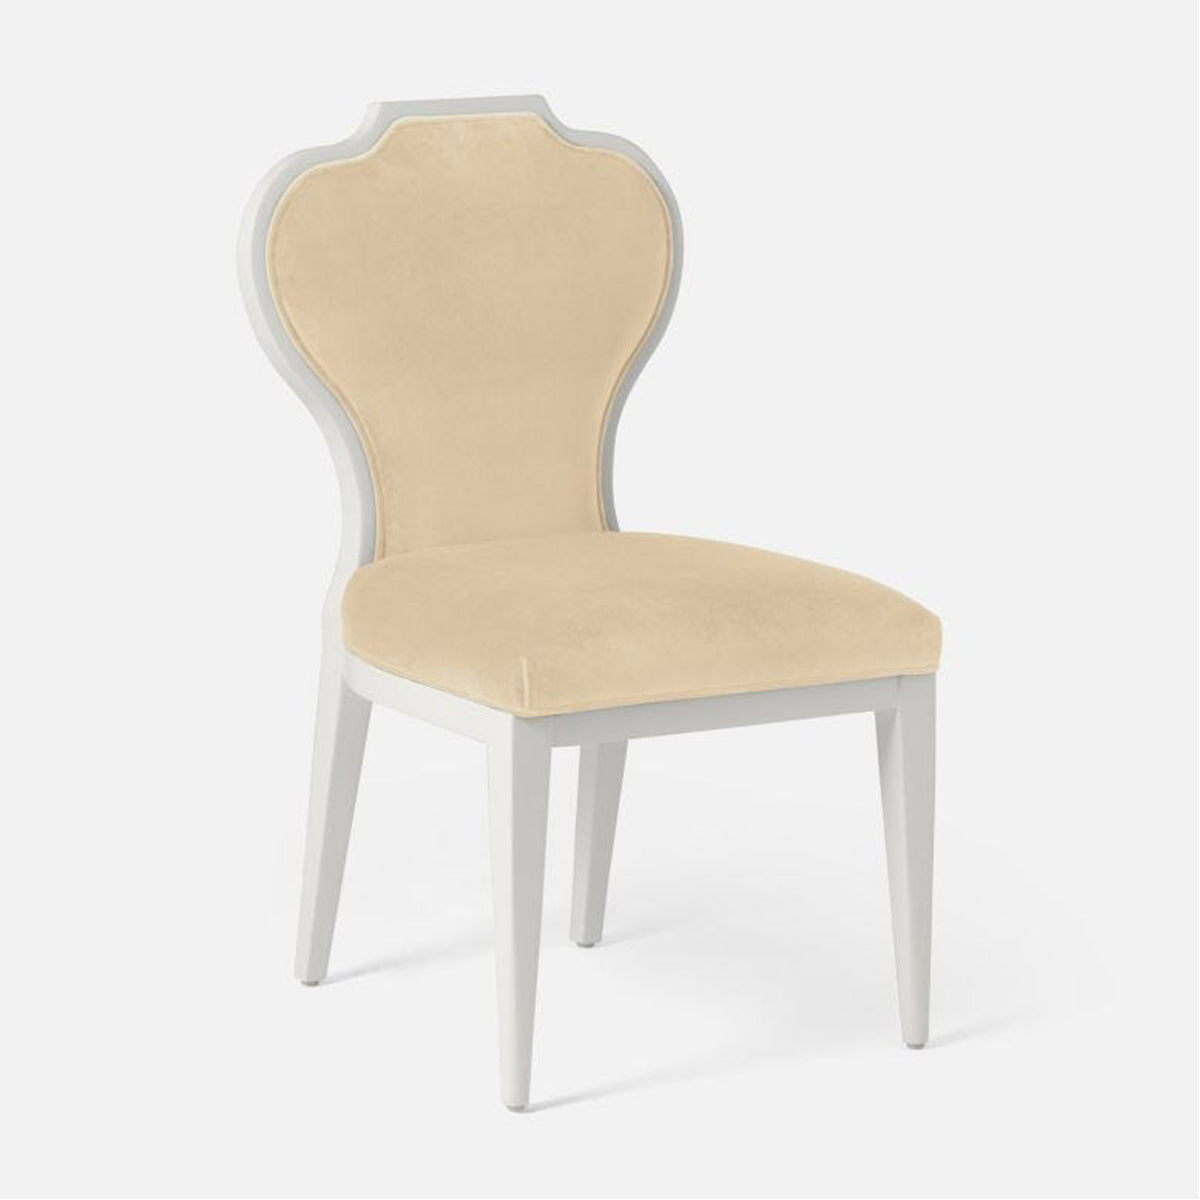 Made Goods Joanna Dining Chair in Danube Fabric